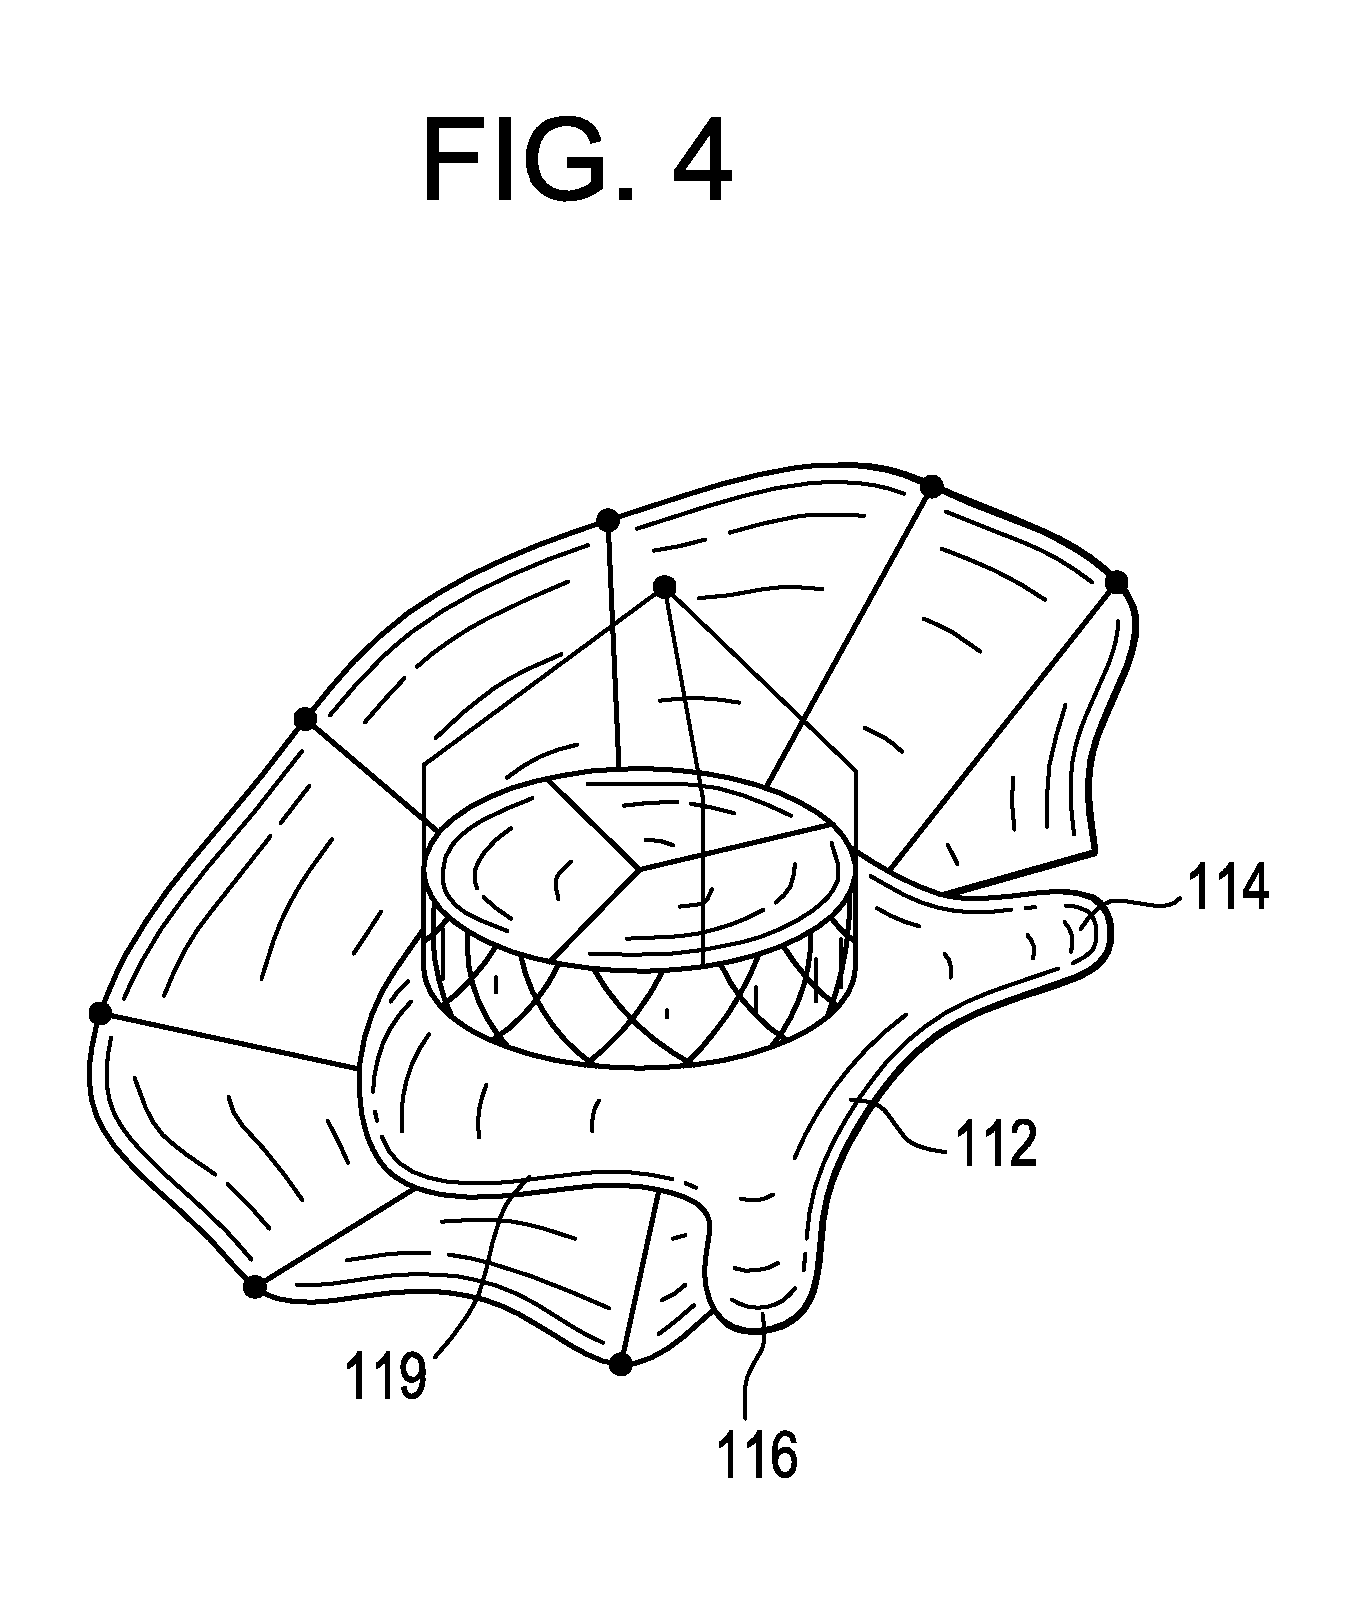 Inflatable annular sealing device for prosthetic mitral valve